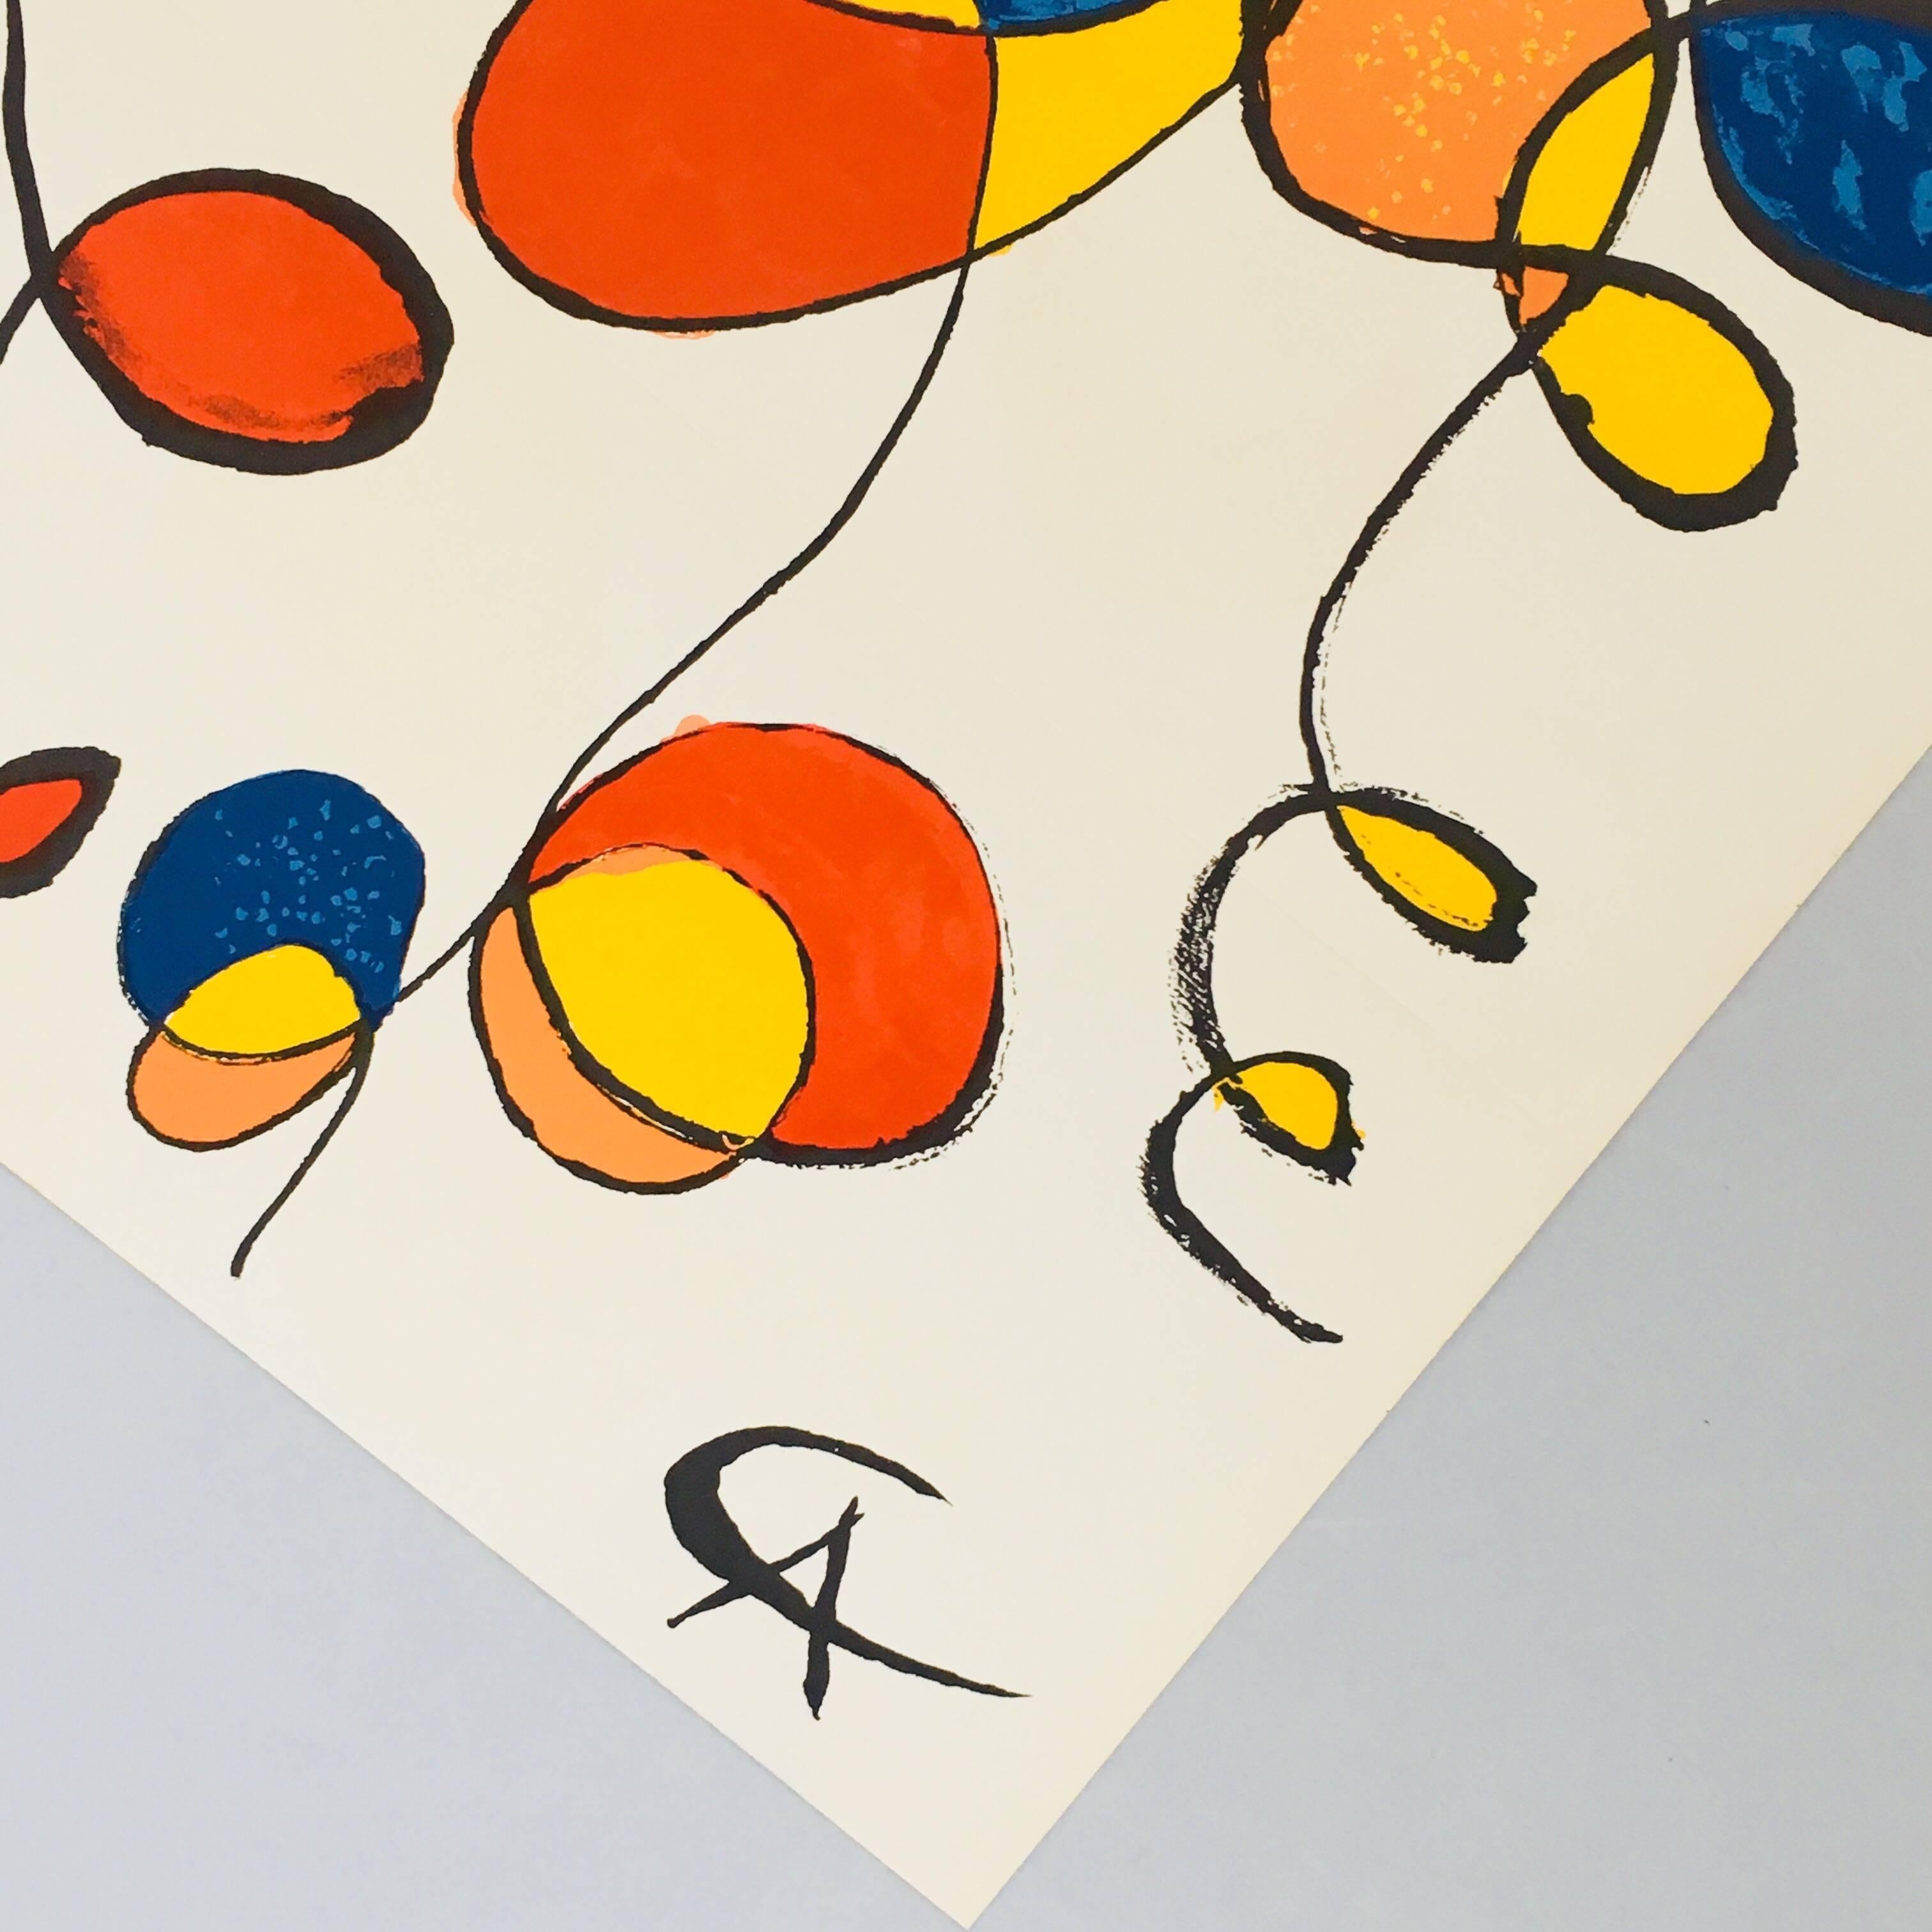 Vintage early 1970s Alexander Calder off-set lithograph

Published by Art in America, circa early 1970s
Very good condition; contains fold-line as issued

Measure: 11.5 x 14.5 inches.